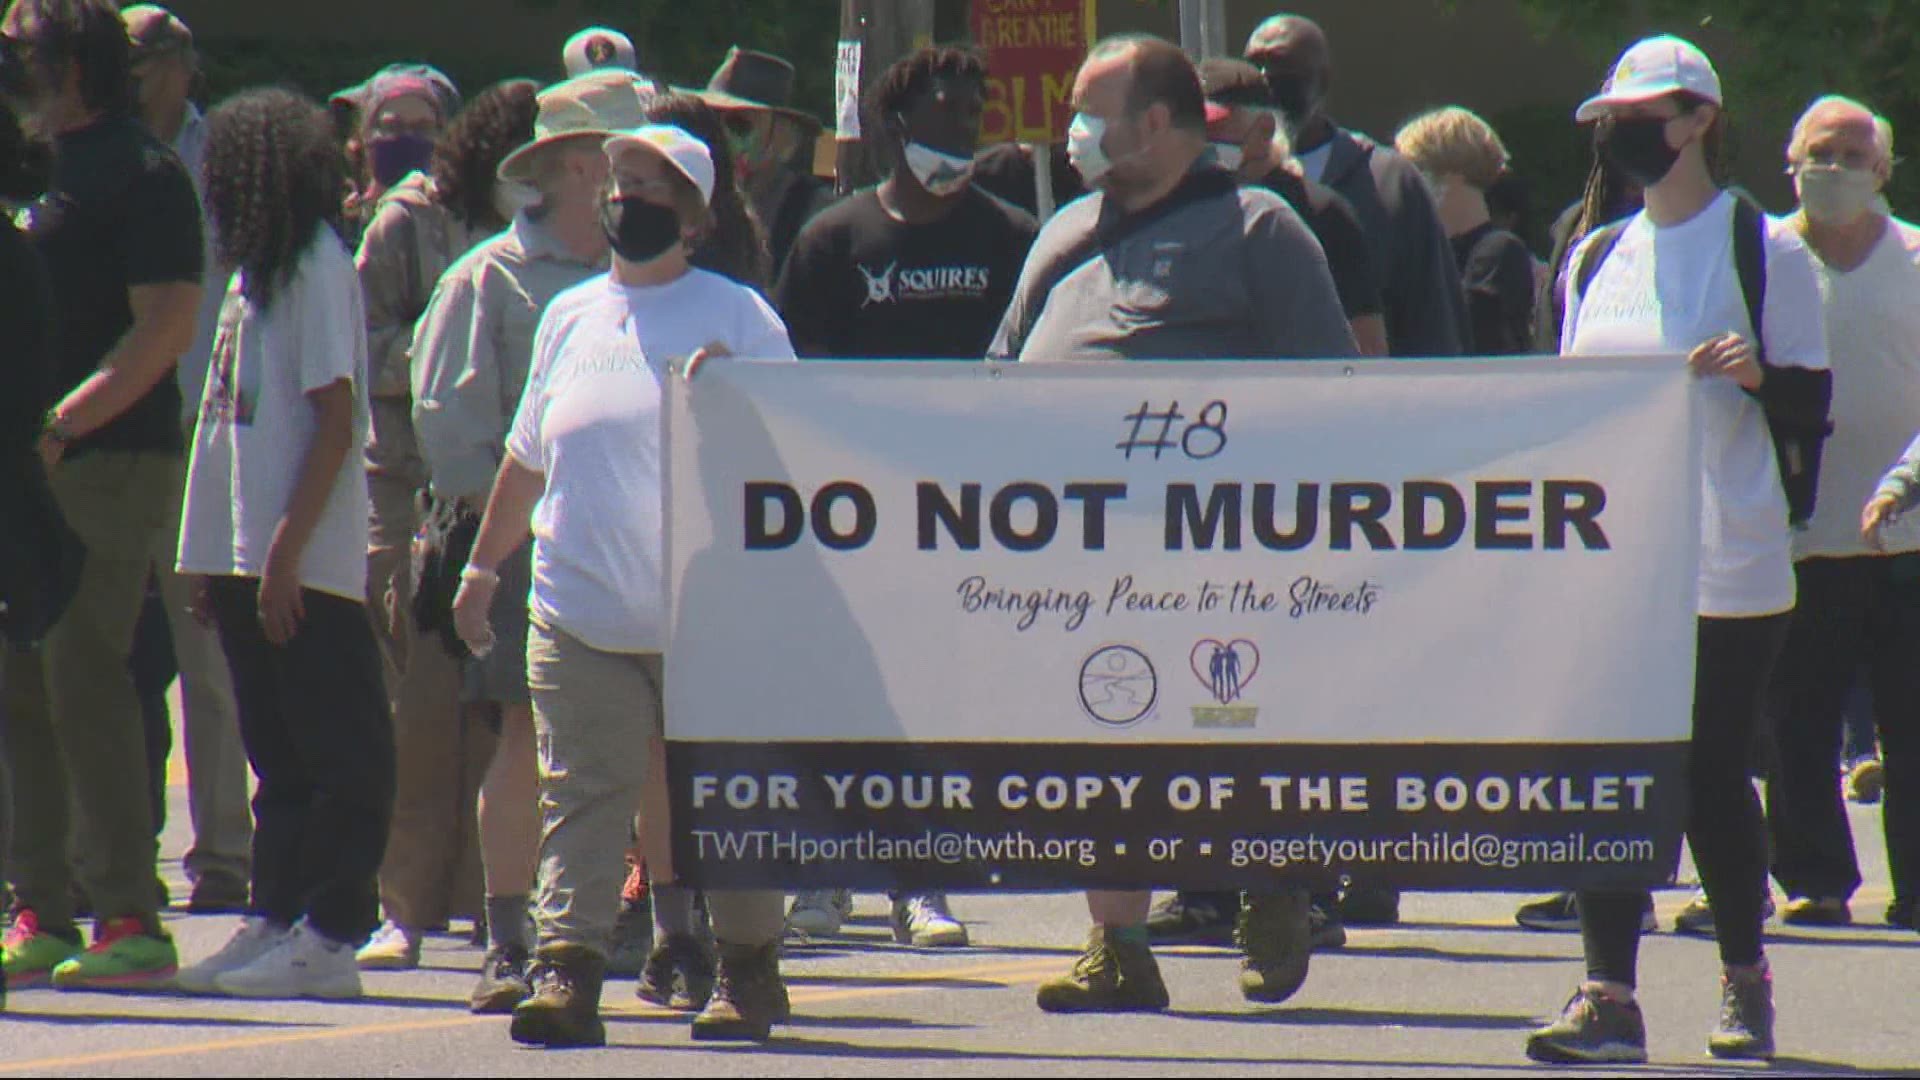 The march brought dozens of people to Peninsula Park on May 22, with a goal of sending a message that the Black community is against premeditated killing.